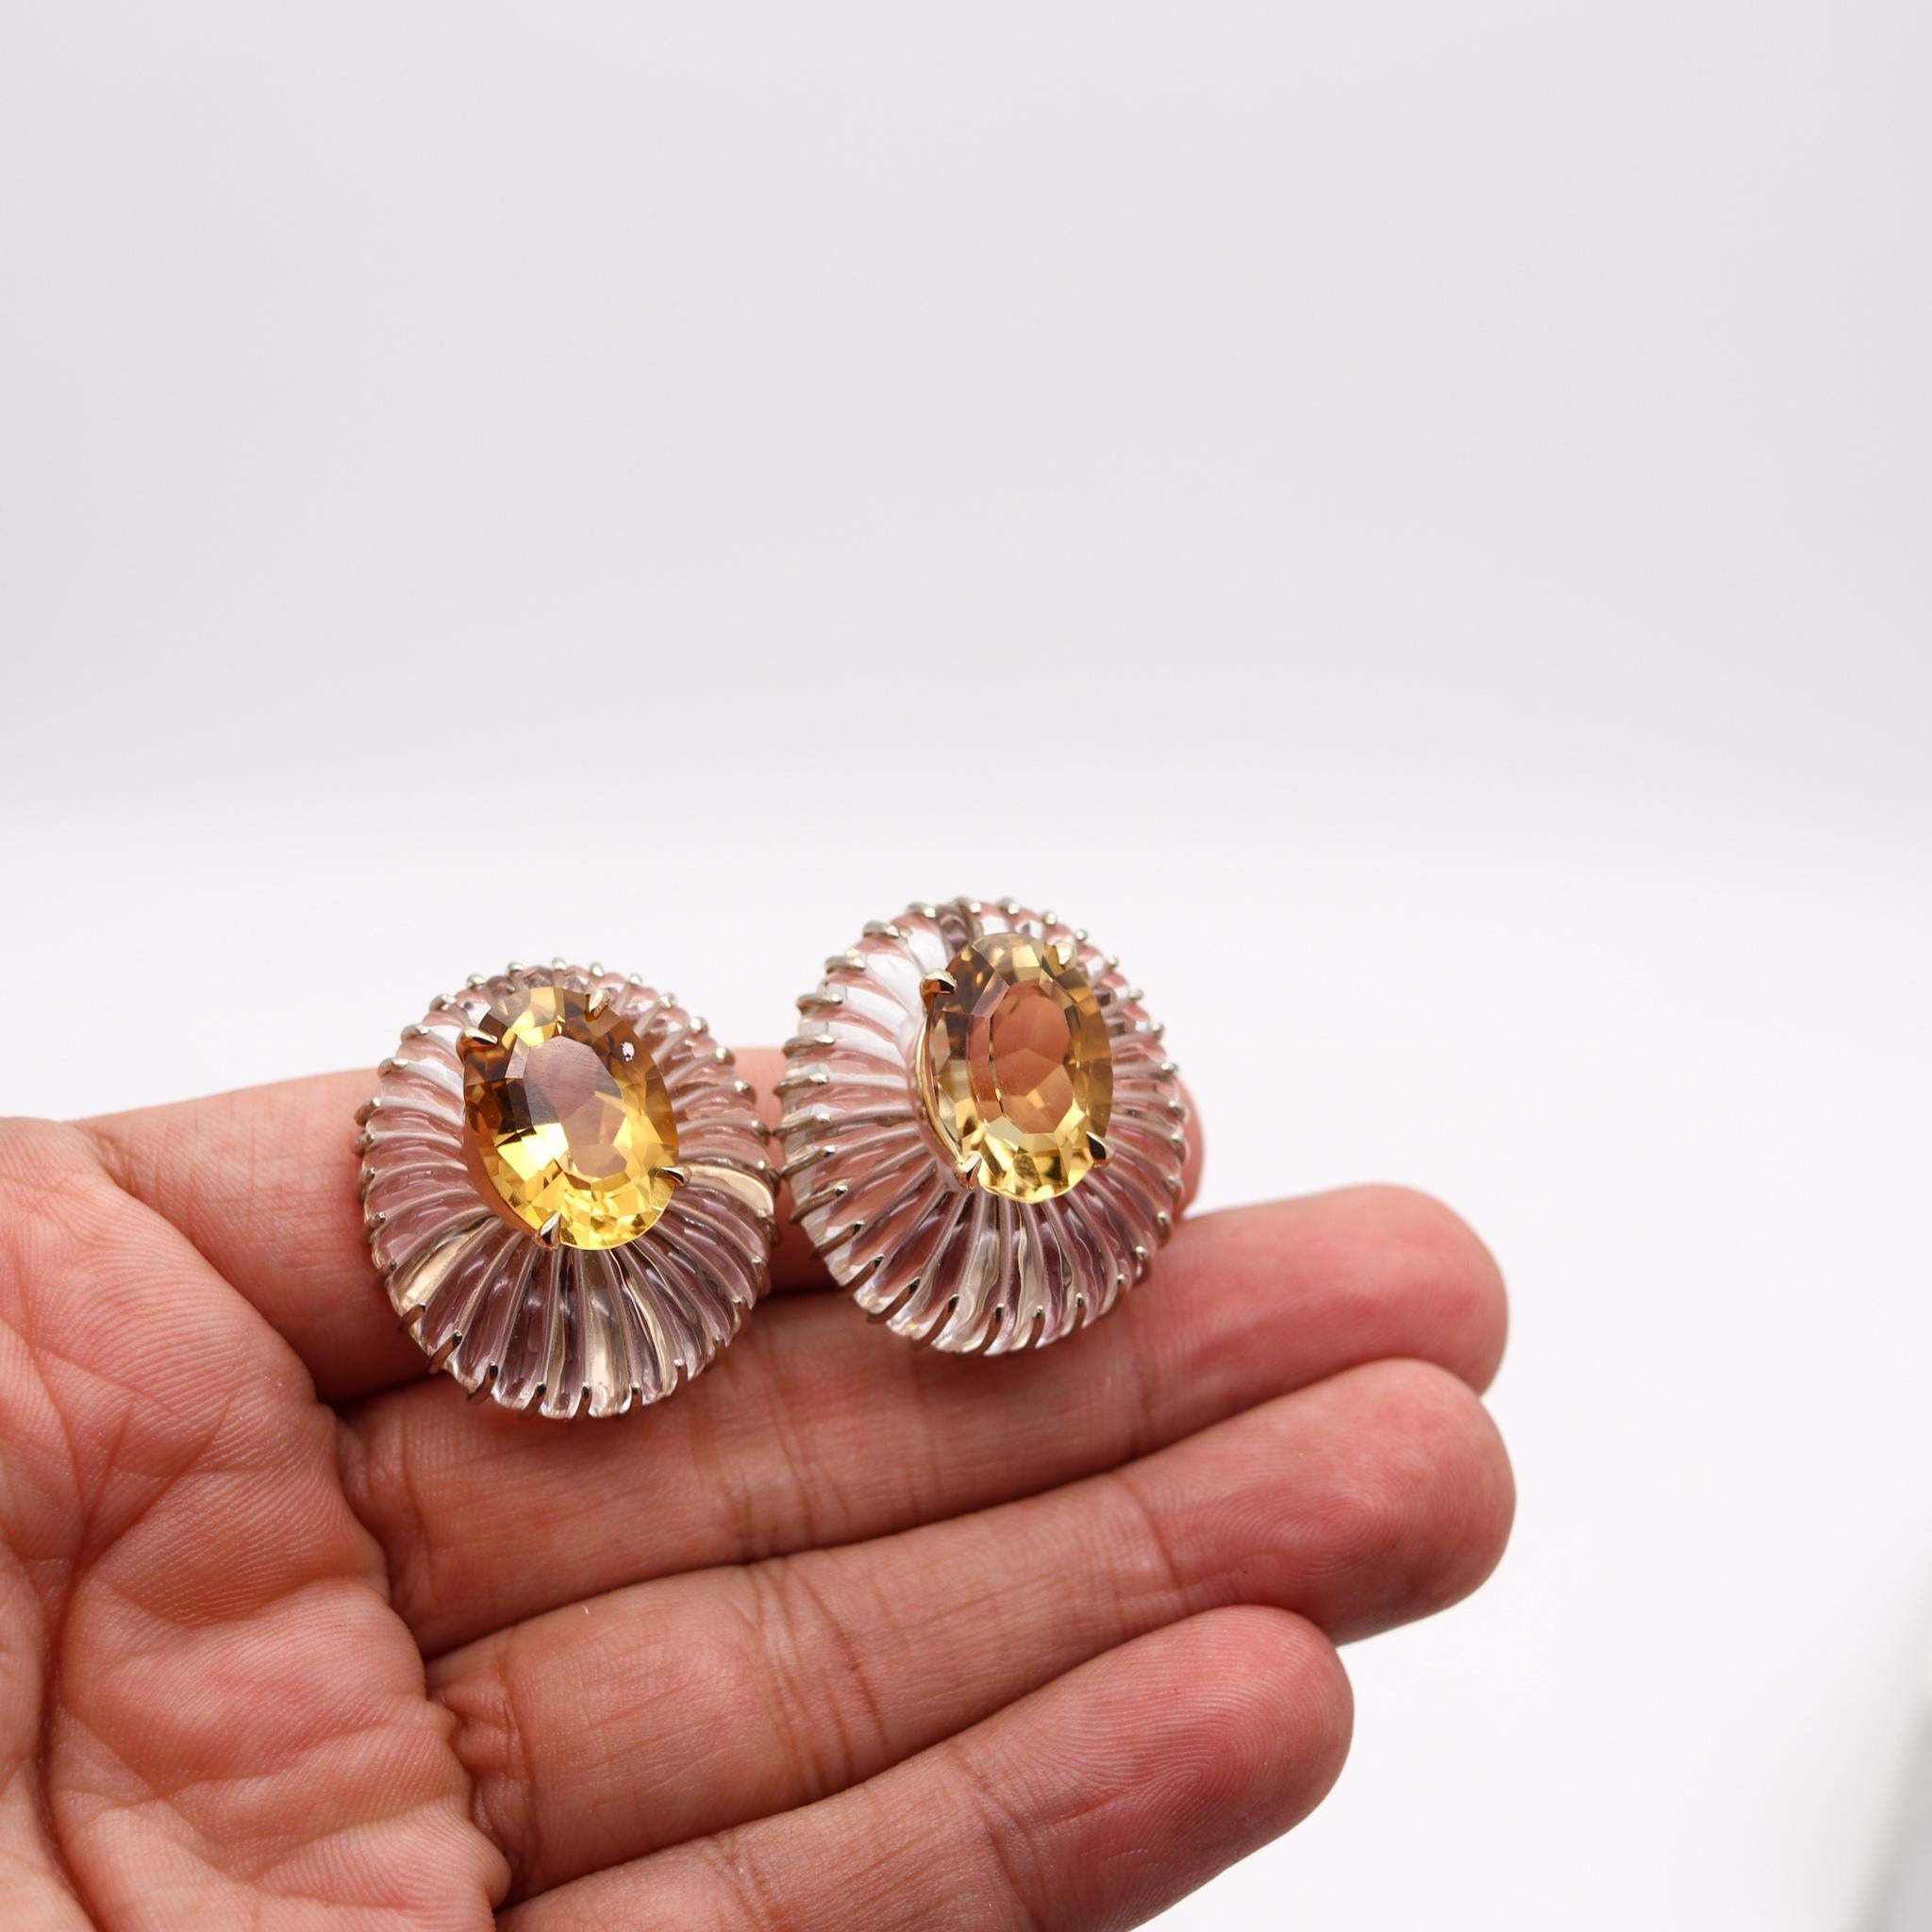 Women's Seaman Schepps 1970 Fluted Rock Quartz Earrings 14kt Gold with 79.32cts Citrine For Sale